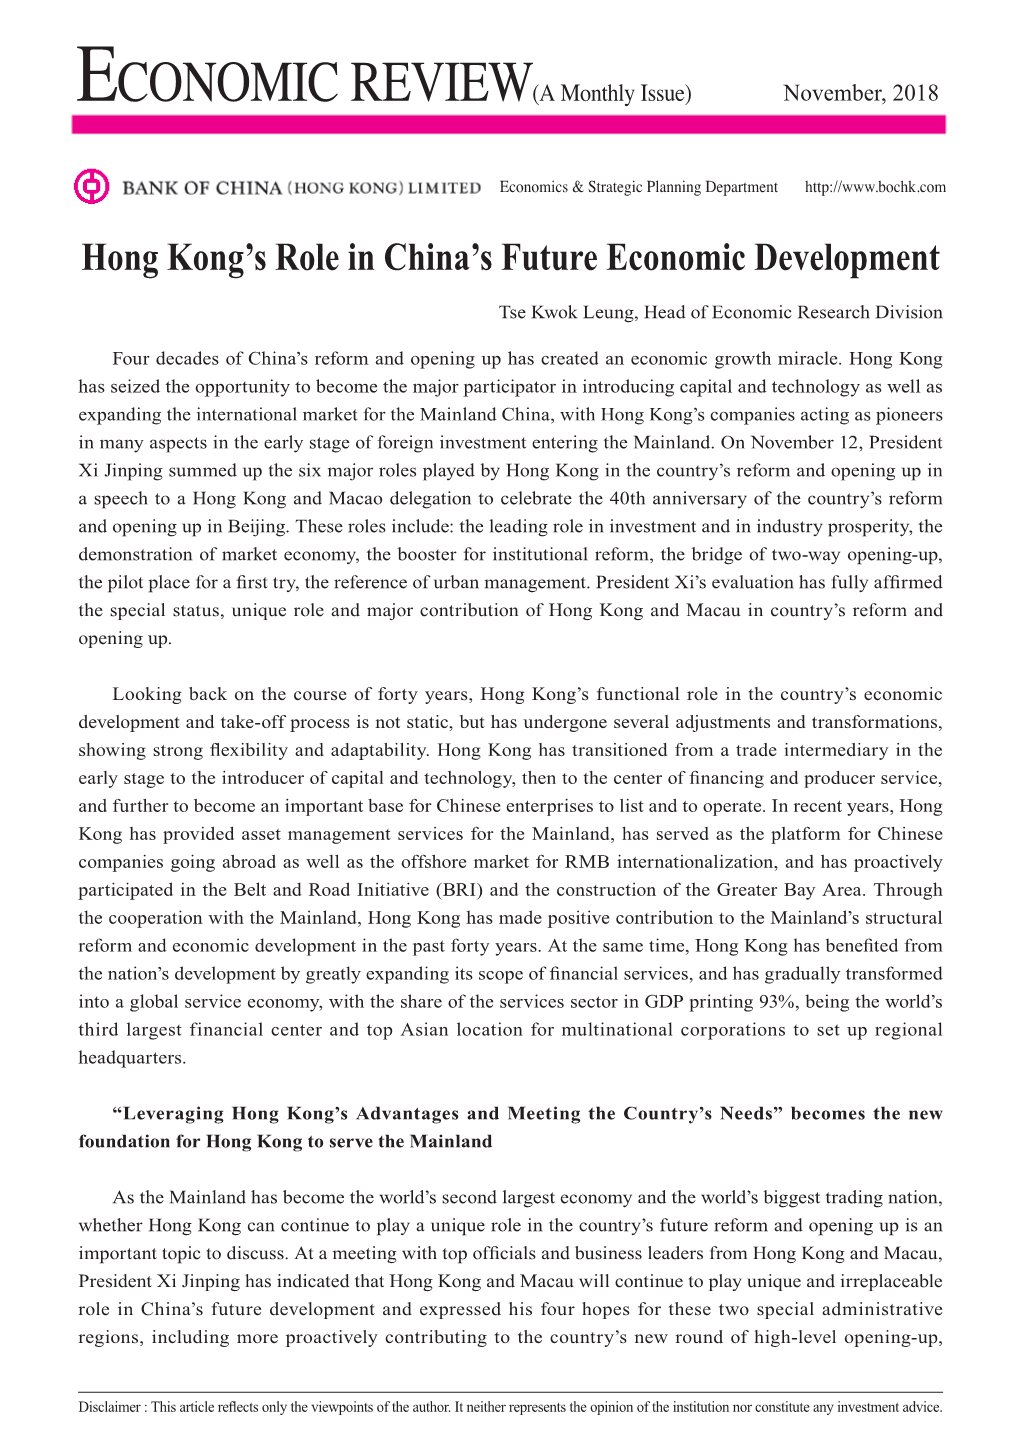 Hong Kong's Role in China's Future Economic Development The